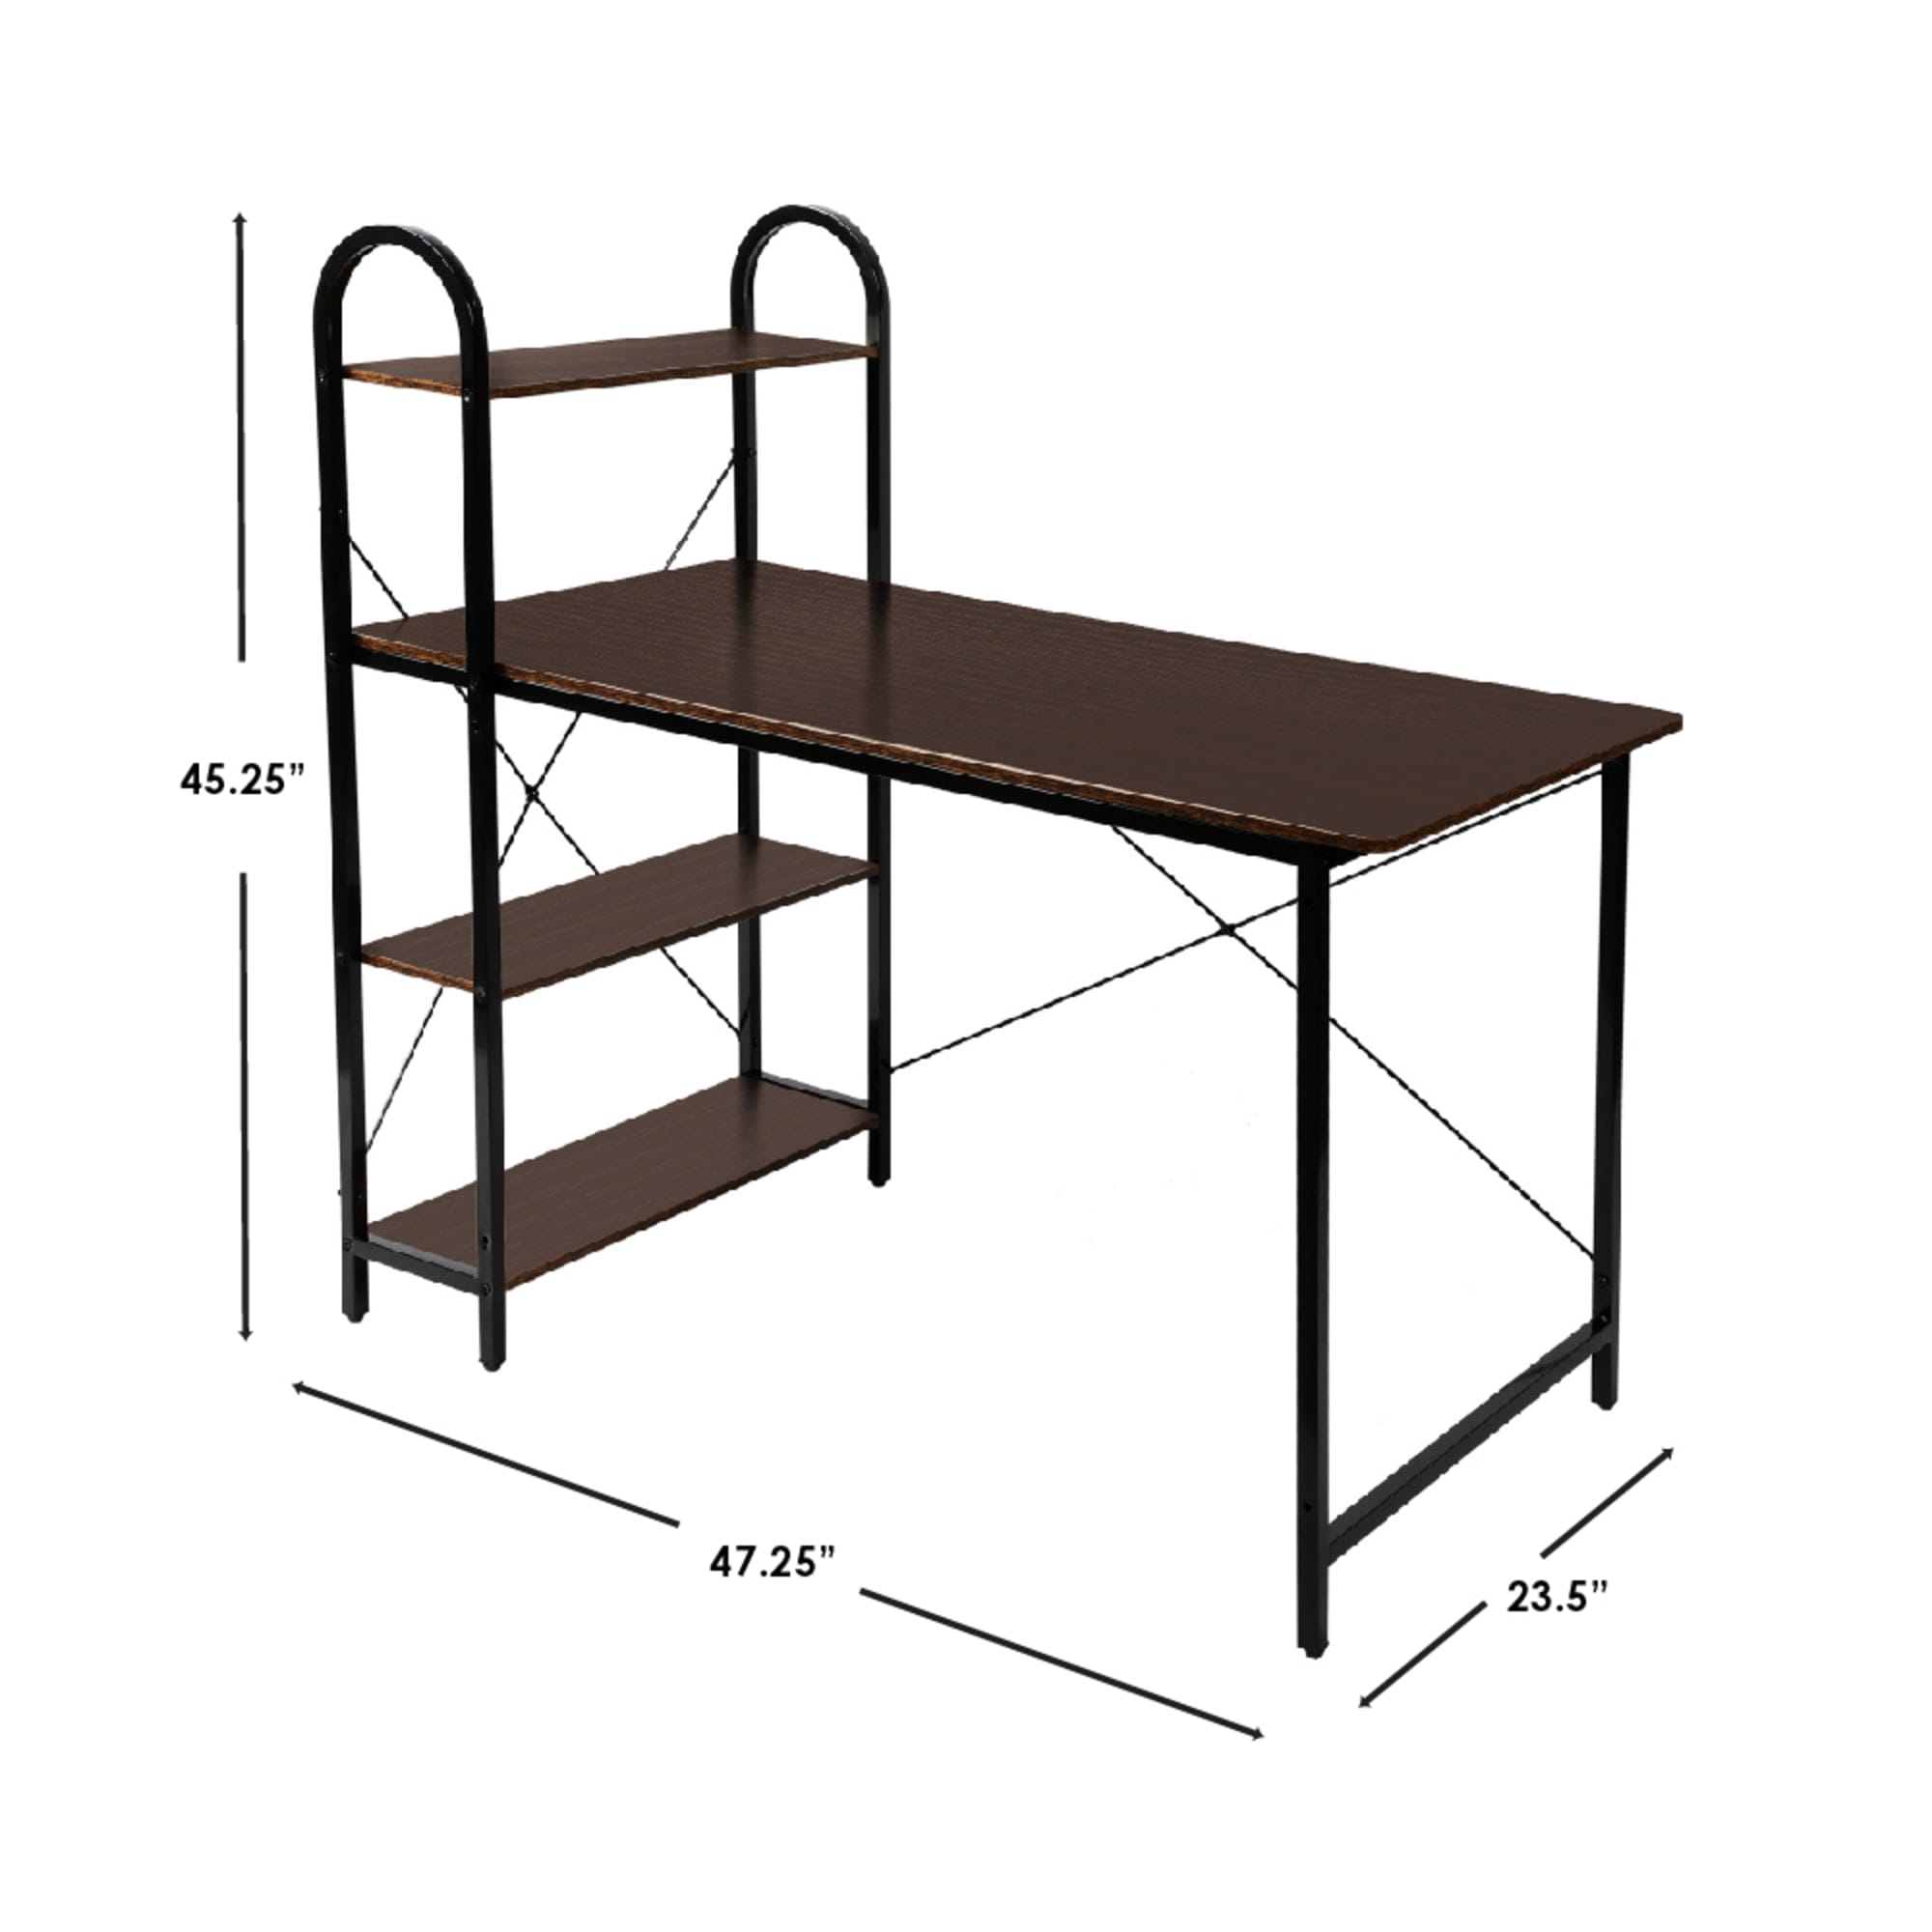 Home Basics Computer Desk with Shelves $100.00 EACH, CASE PACK OF 1